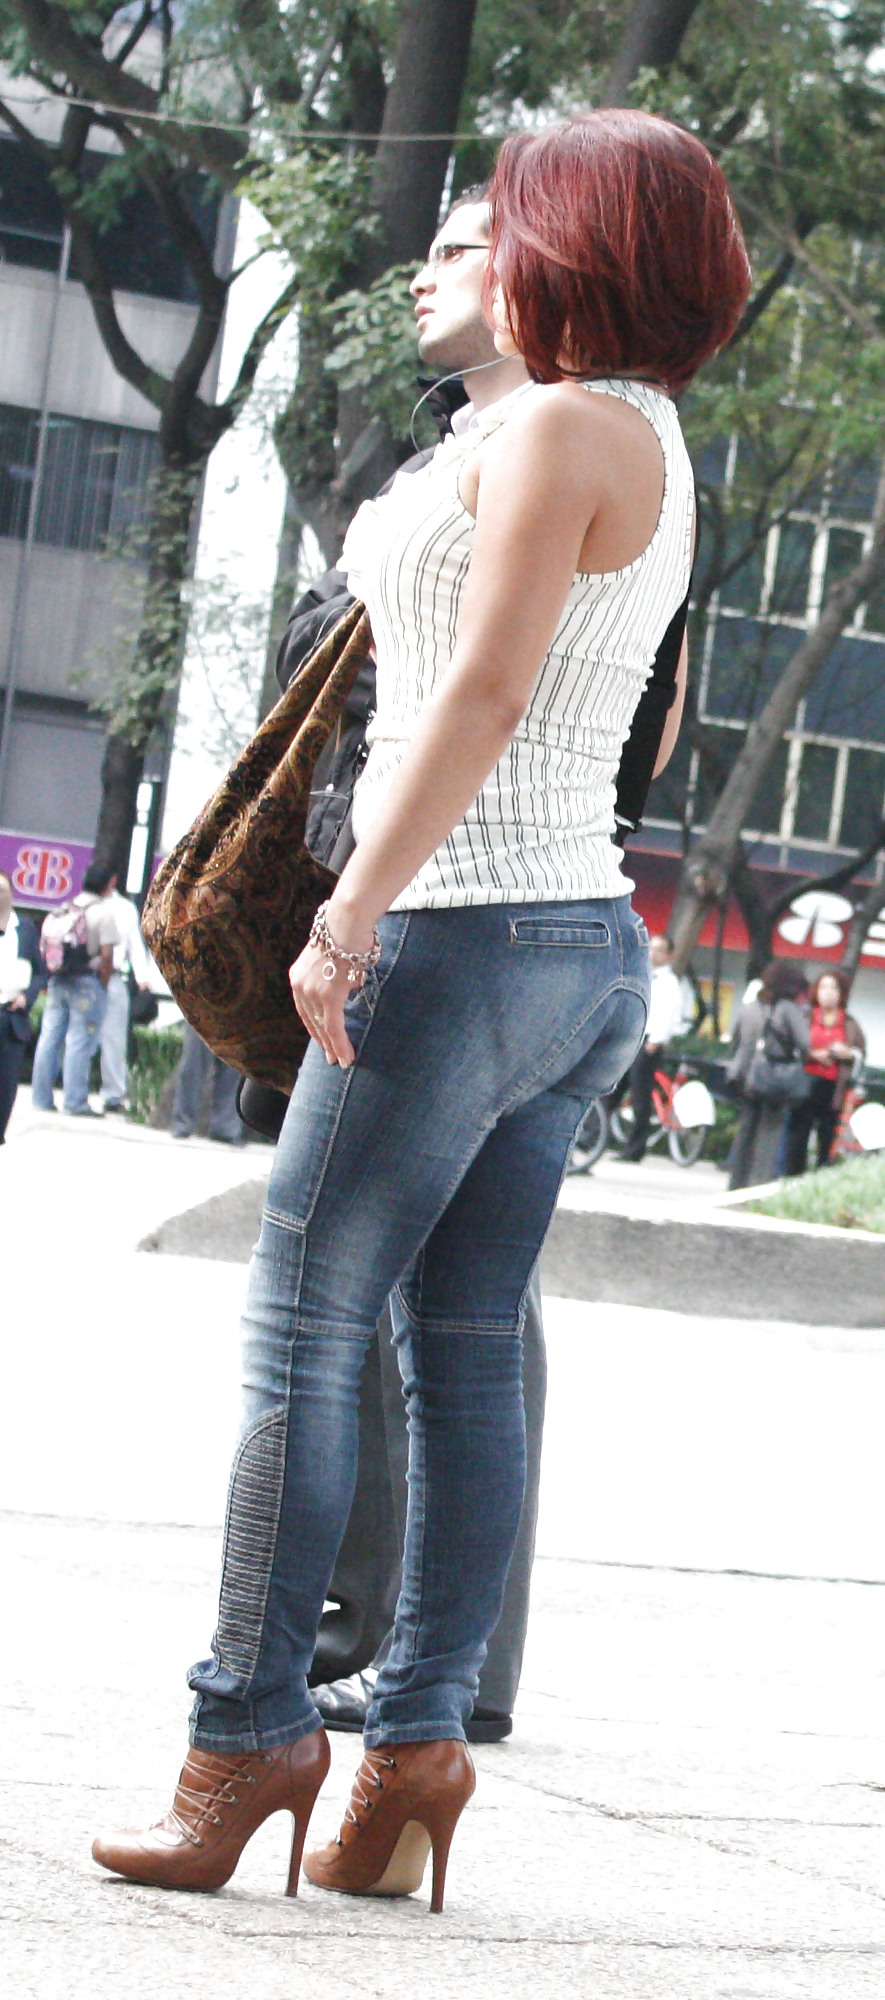 MILF In Tight Jeans #19832373